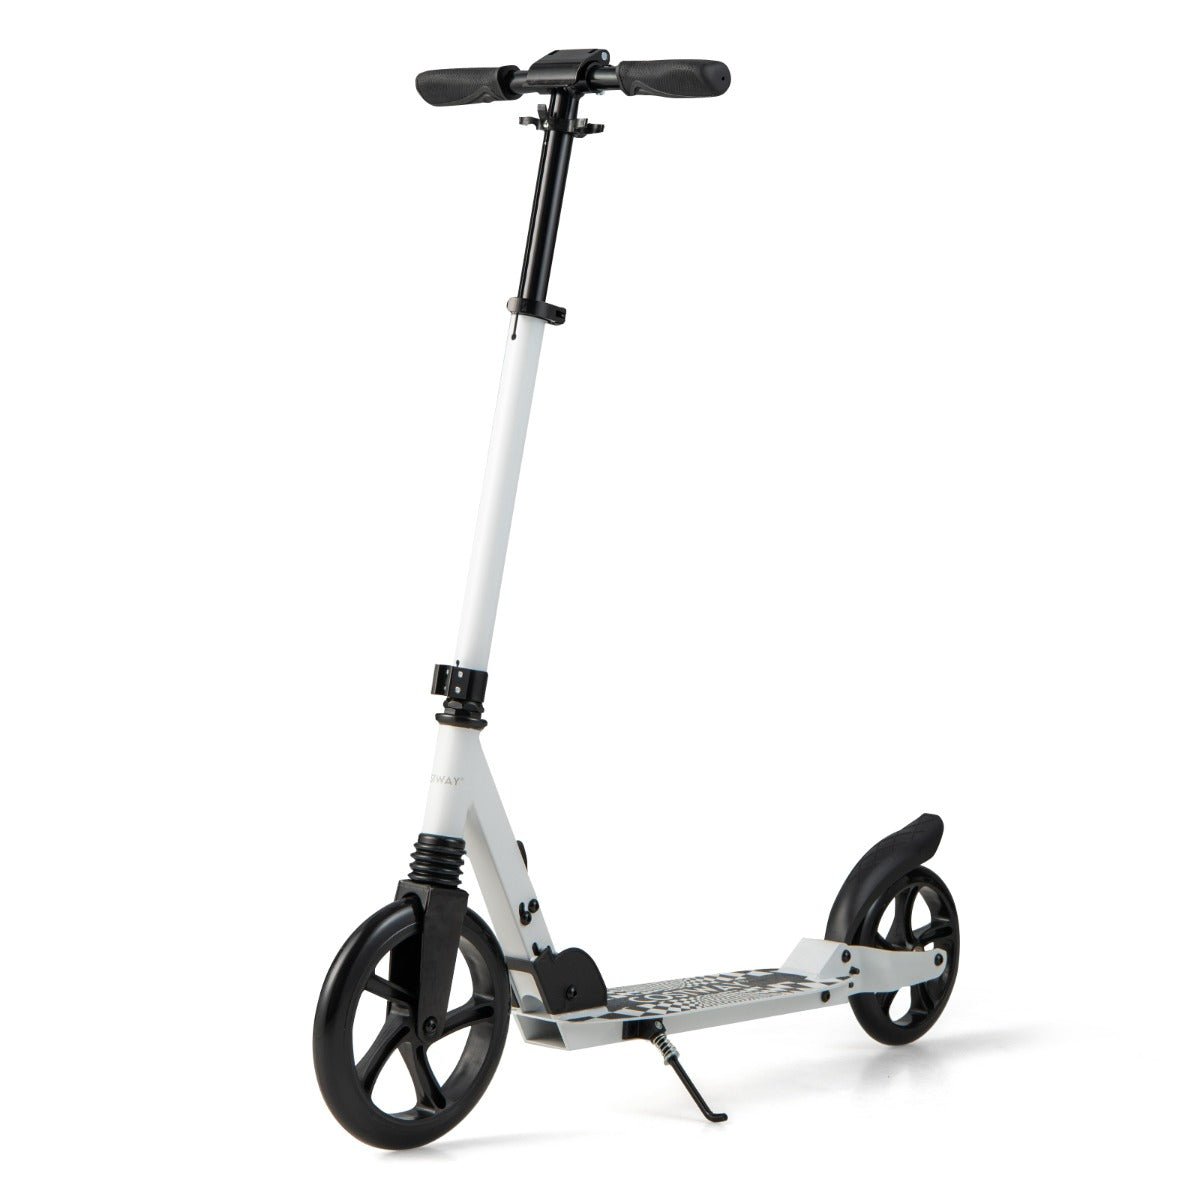 White Kids Foldable Scooter: Adjustable Height, LED Light, and Lightweight Design